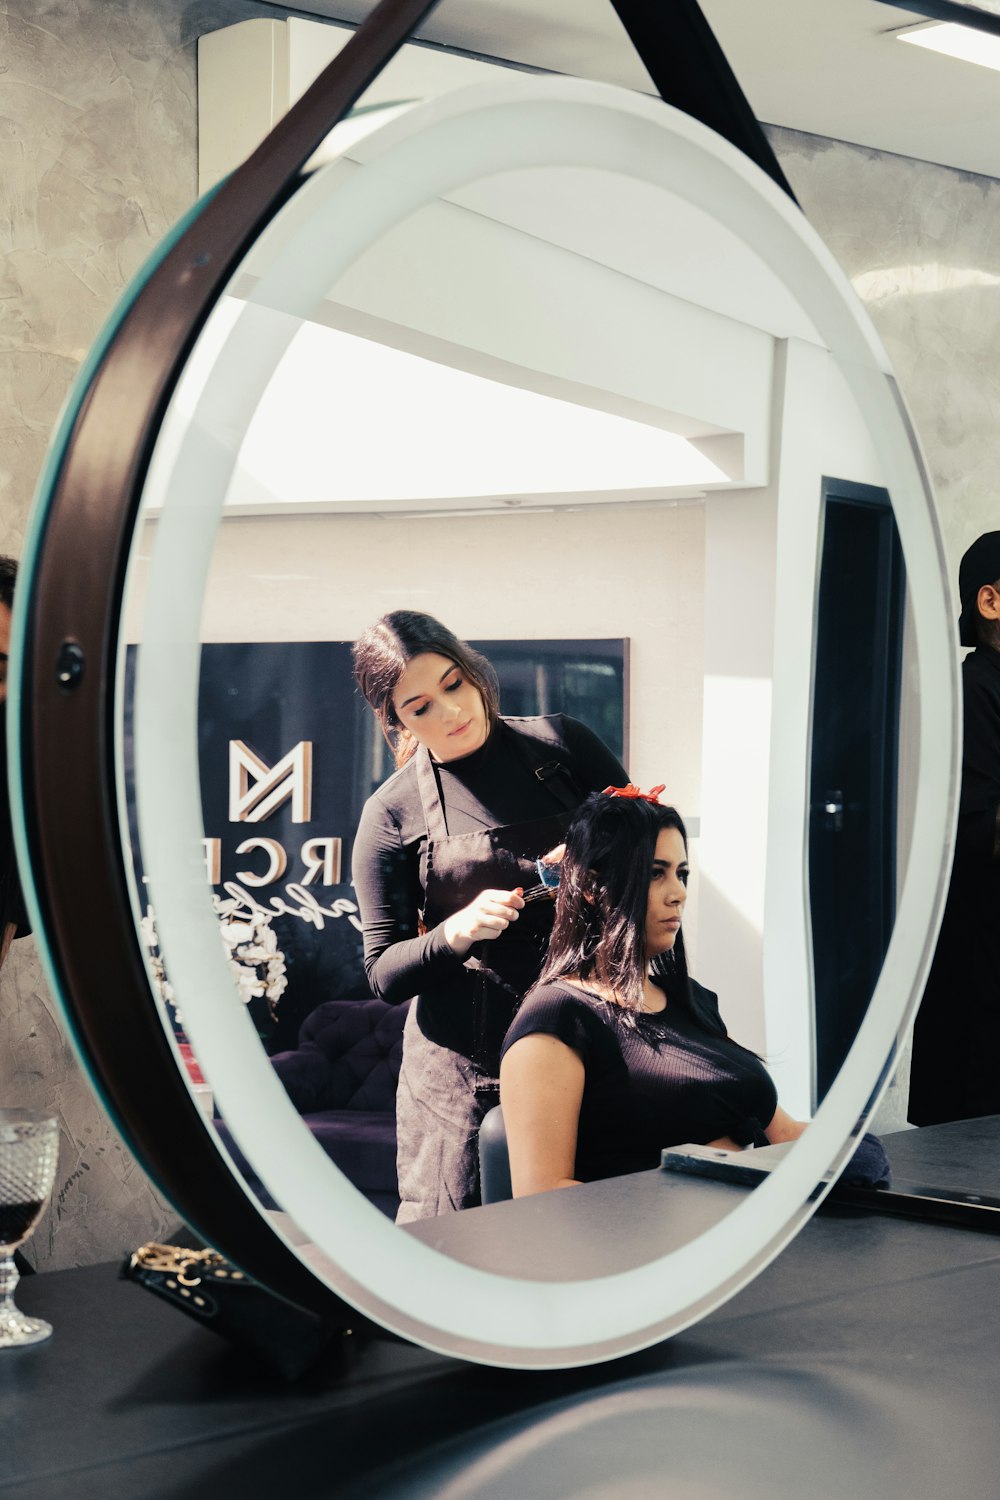 a woman getting her hair styled in a mirror